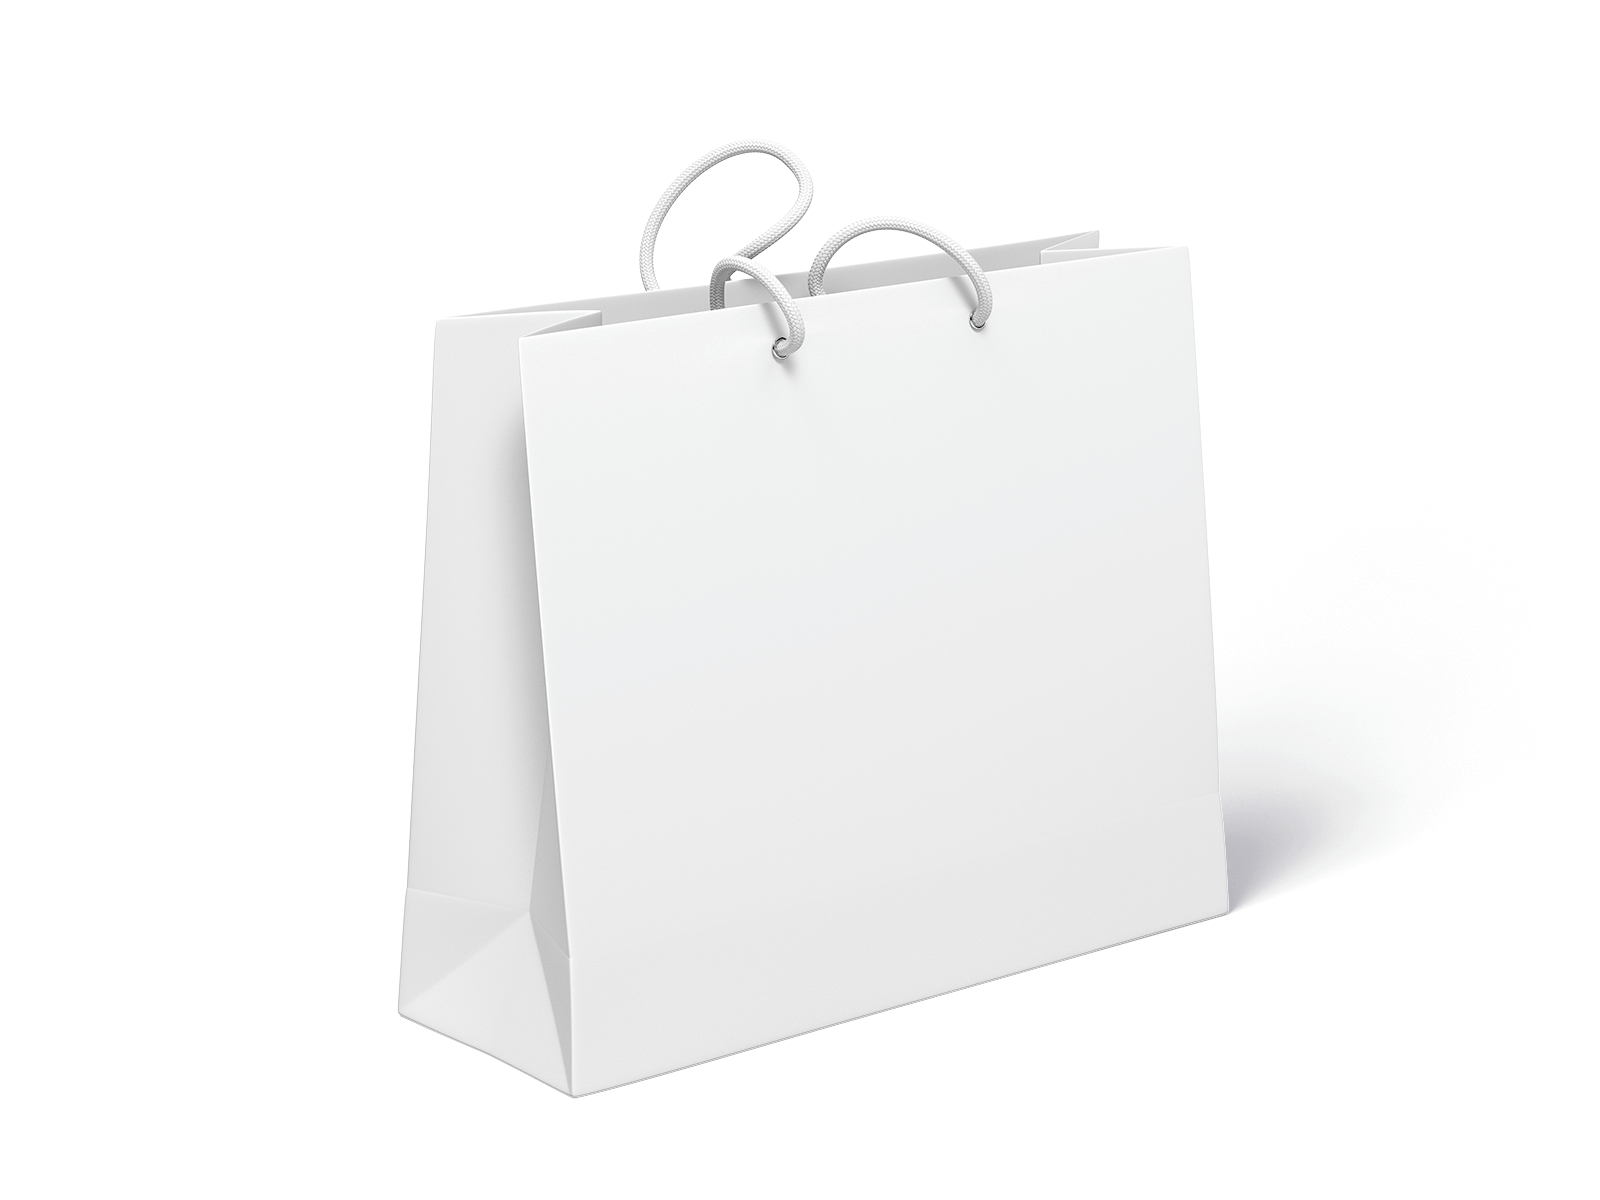 Free Paper Shopping Bag with Cotton Cord Handles Mockup